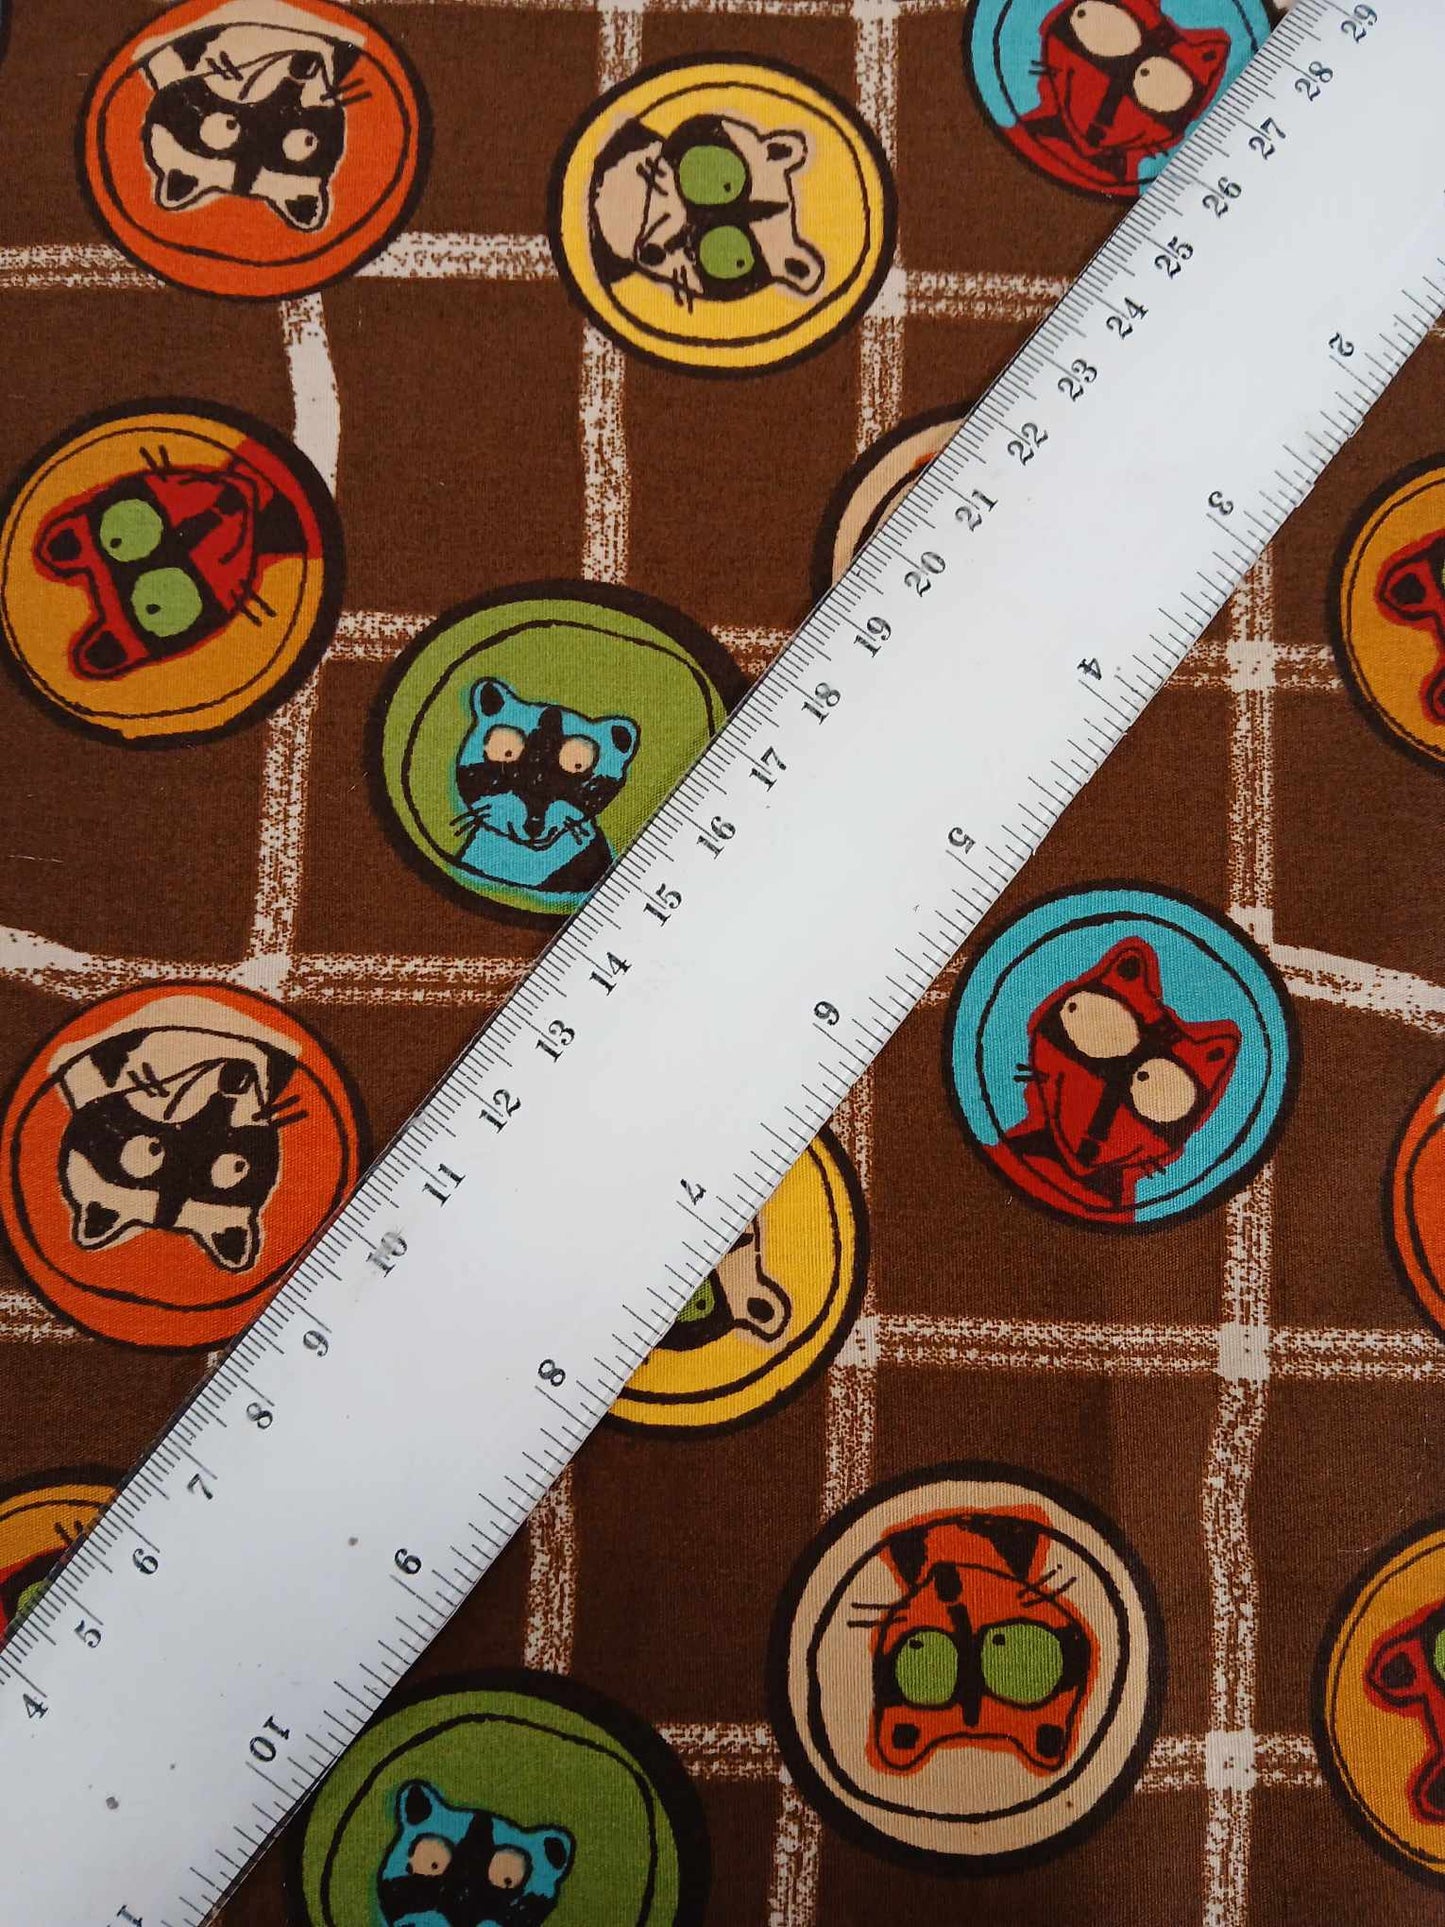 100% Cotton - Raccoons - Brown/Cream/Blue/Green/Orange - 56" Wide - Sold By the Metre